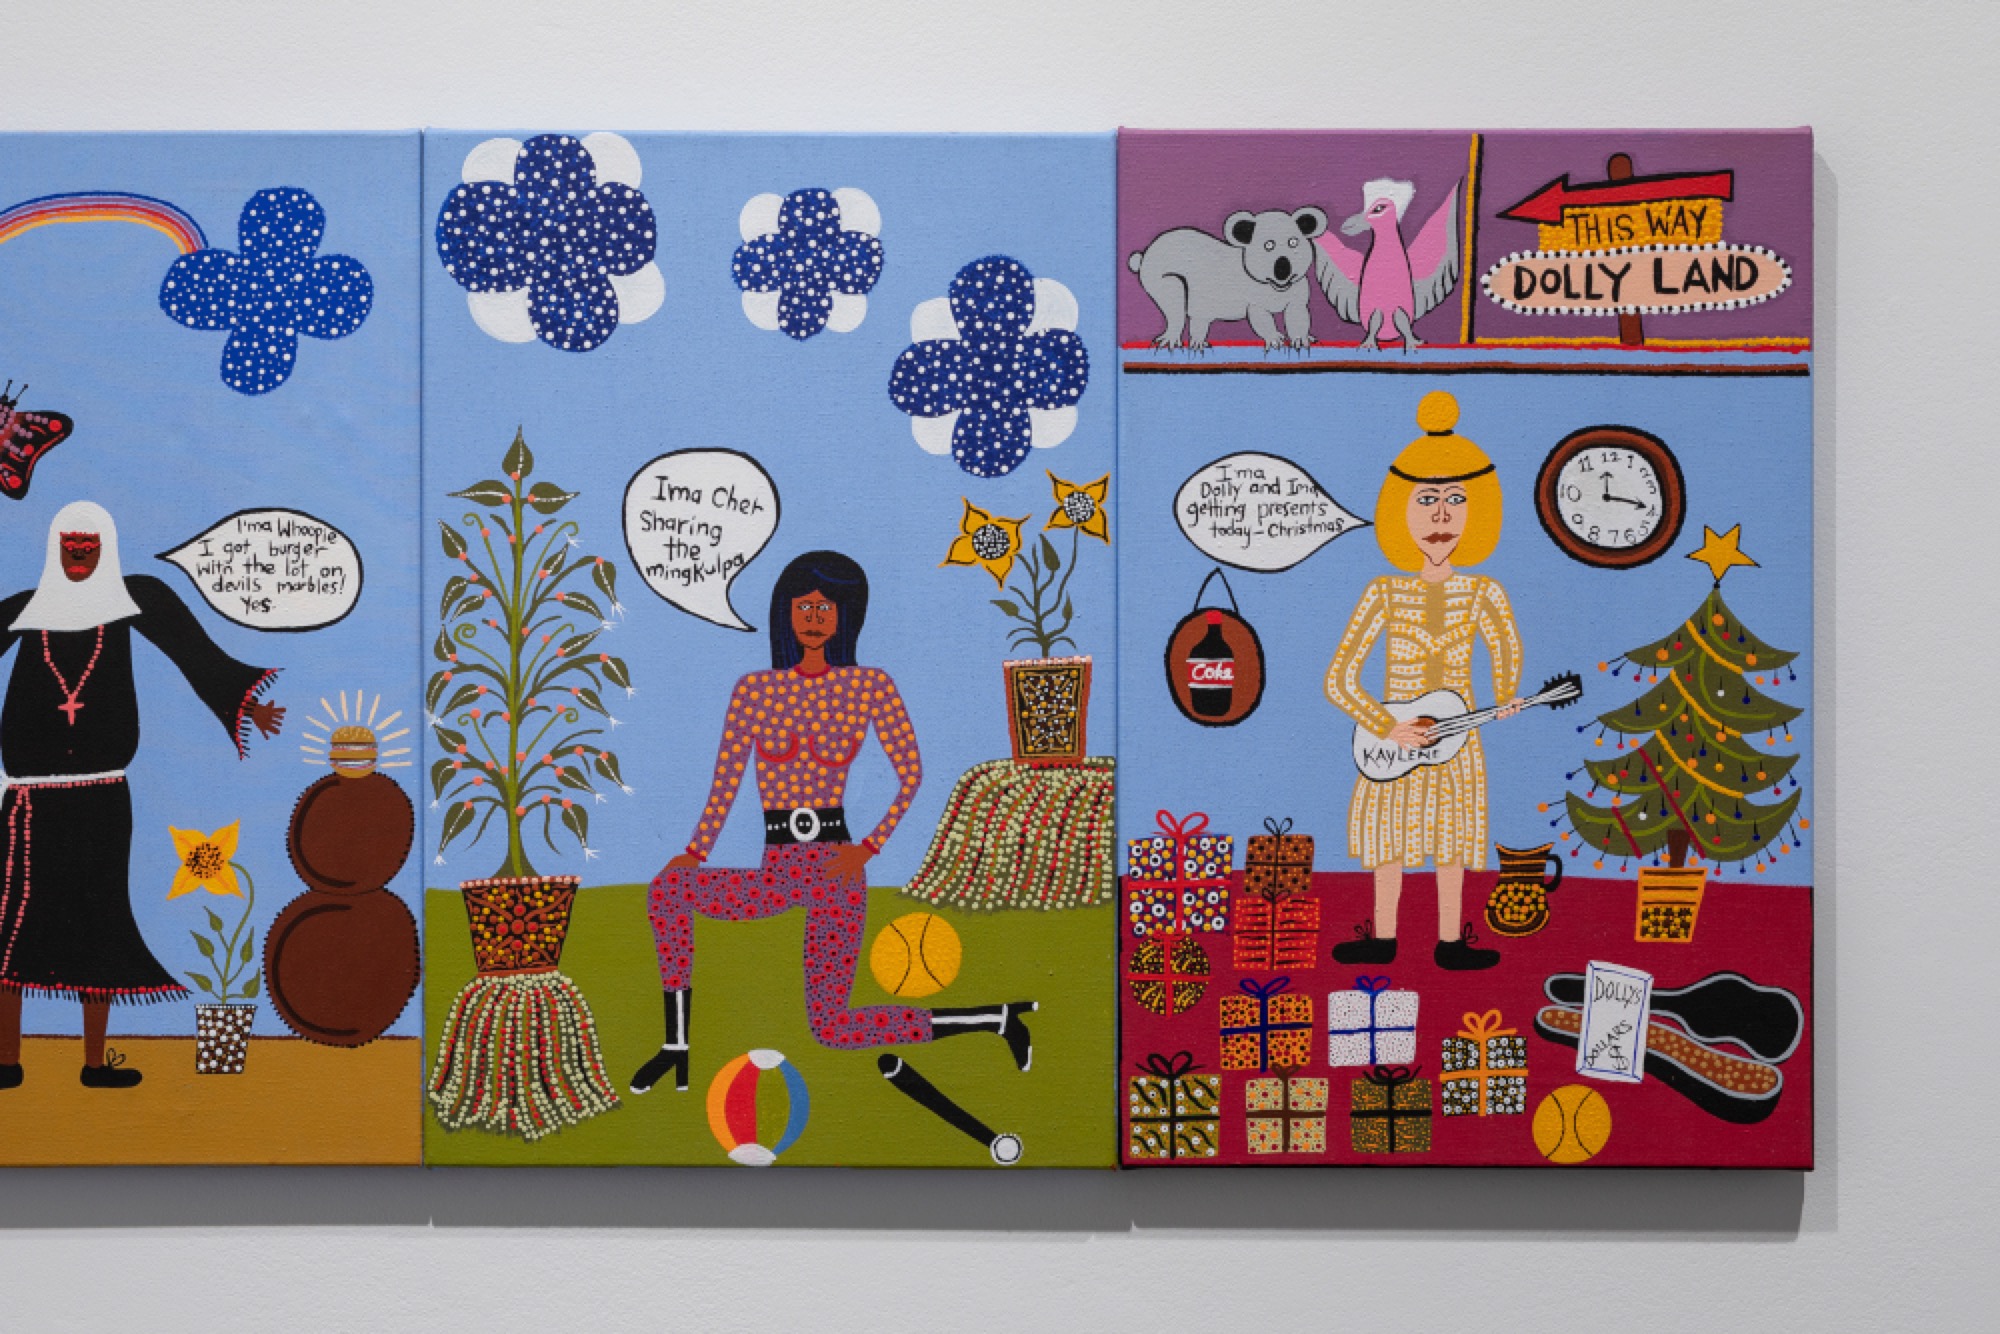 Kaylene Whiskey, <em>Seven Sistas</em> 2018 (detail), synthetic polymer paint on canvas, 8 panels: 307.0 x 124.0 cm (each), installation view, Australian Centre for Contemporary Art, Melbourne. Courtesy the artist, Iwantja Arts, Indulkana, and blackartprojects, Melbourne. Photograph: Andrew Curtis.